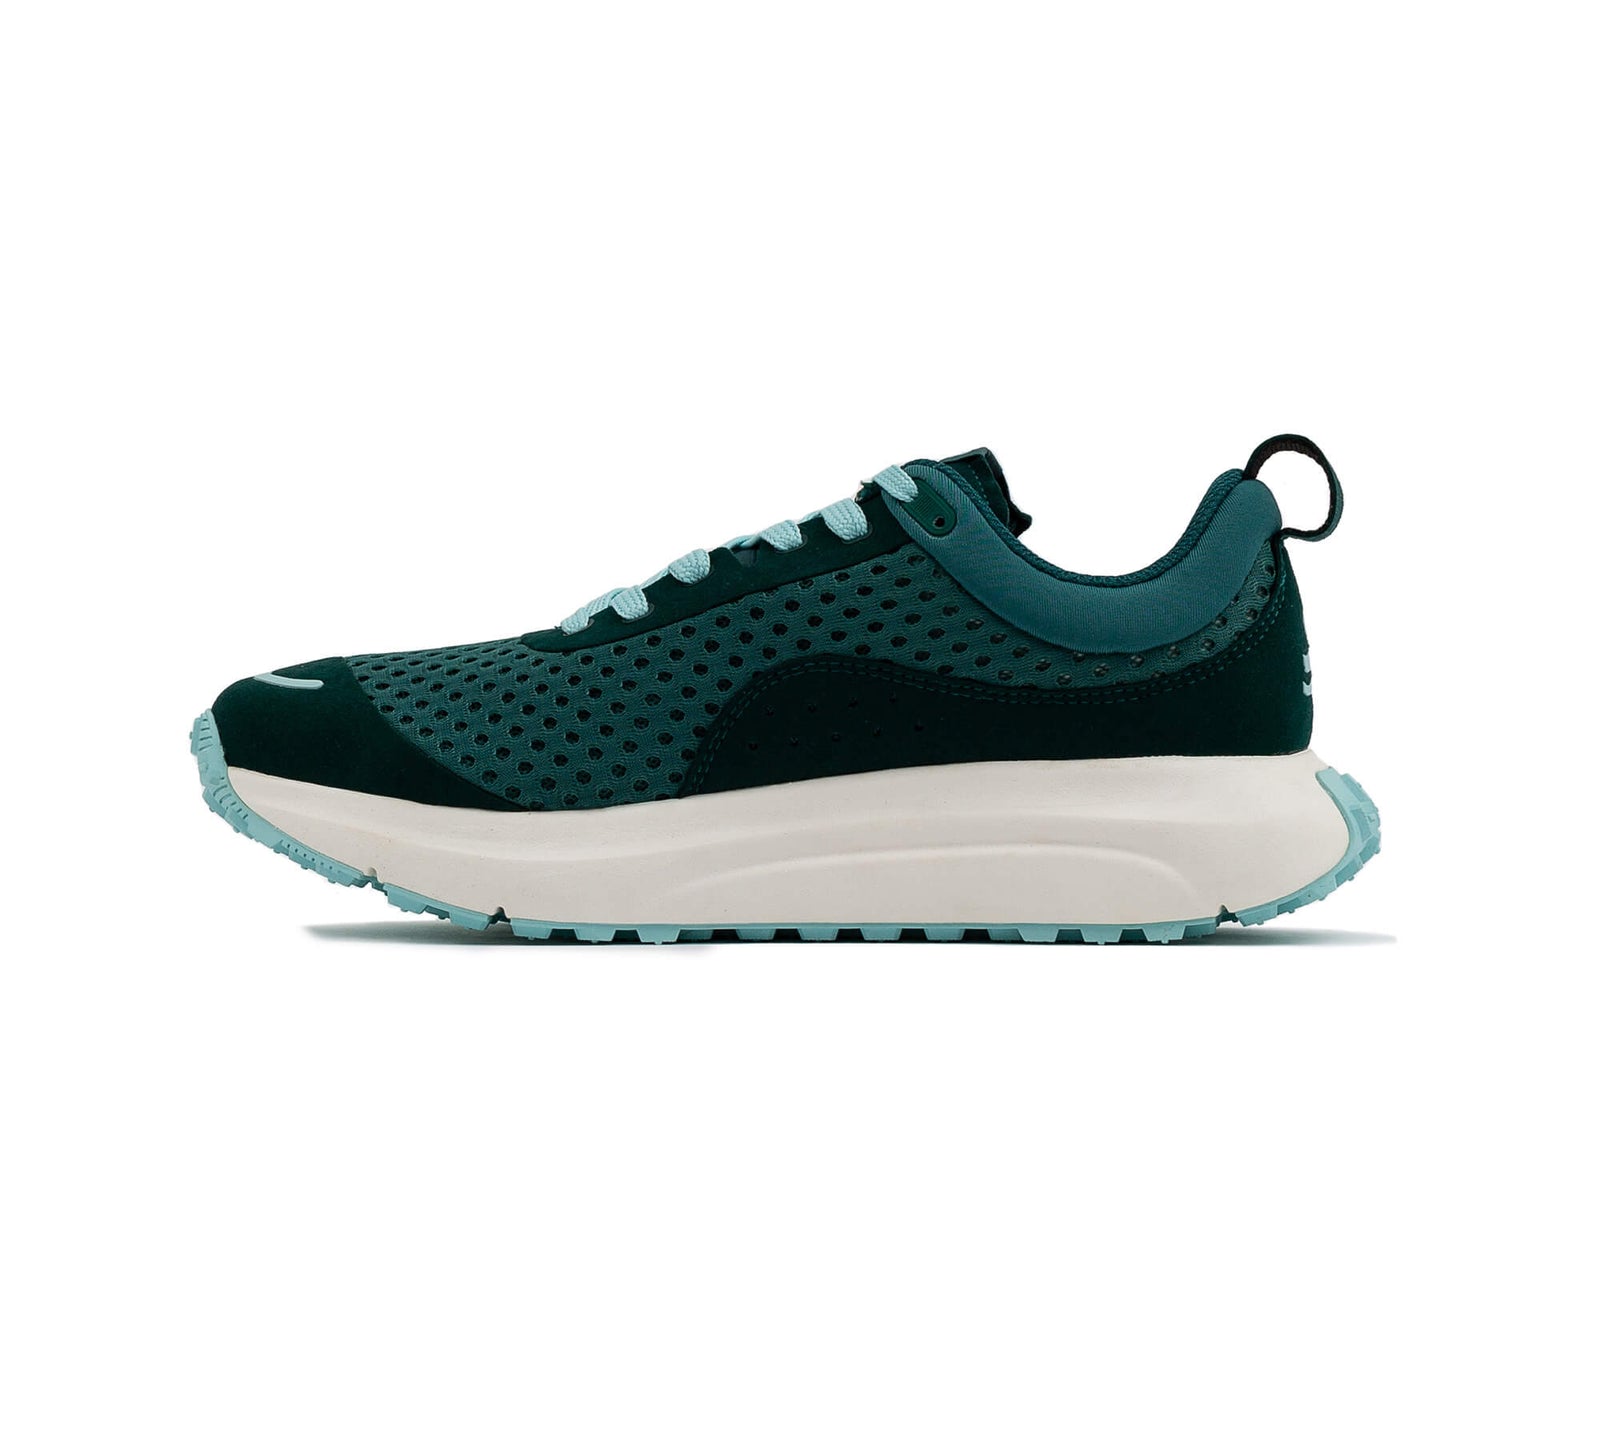 Interior side view of the right Everywhere Hilma Running Shoe in Evergreen